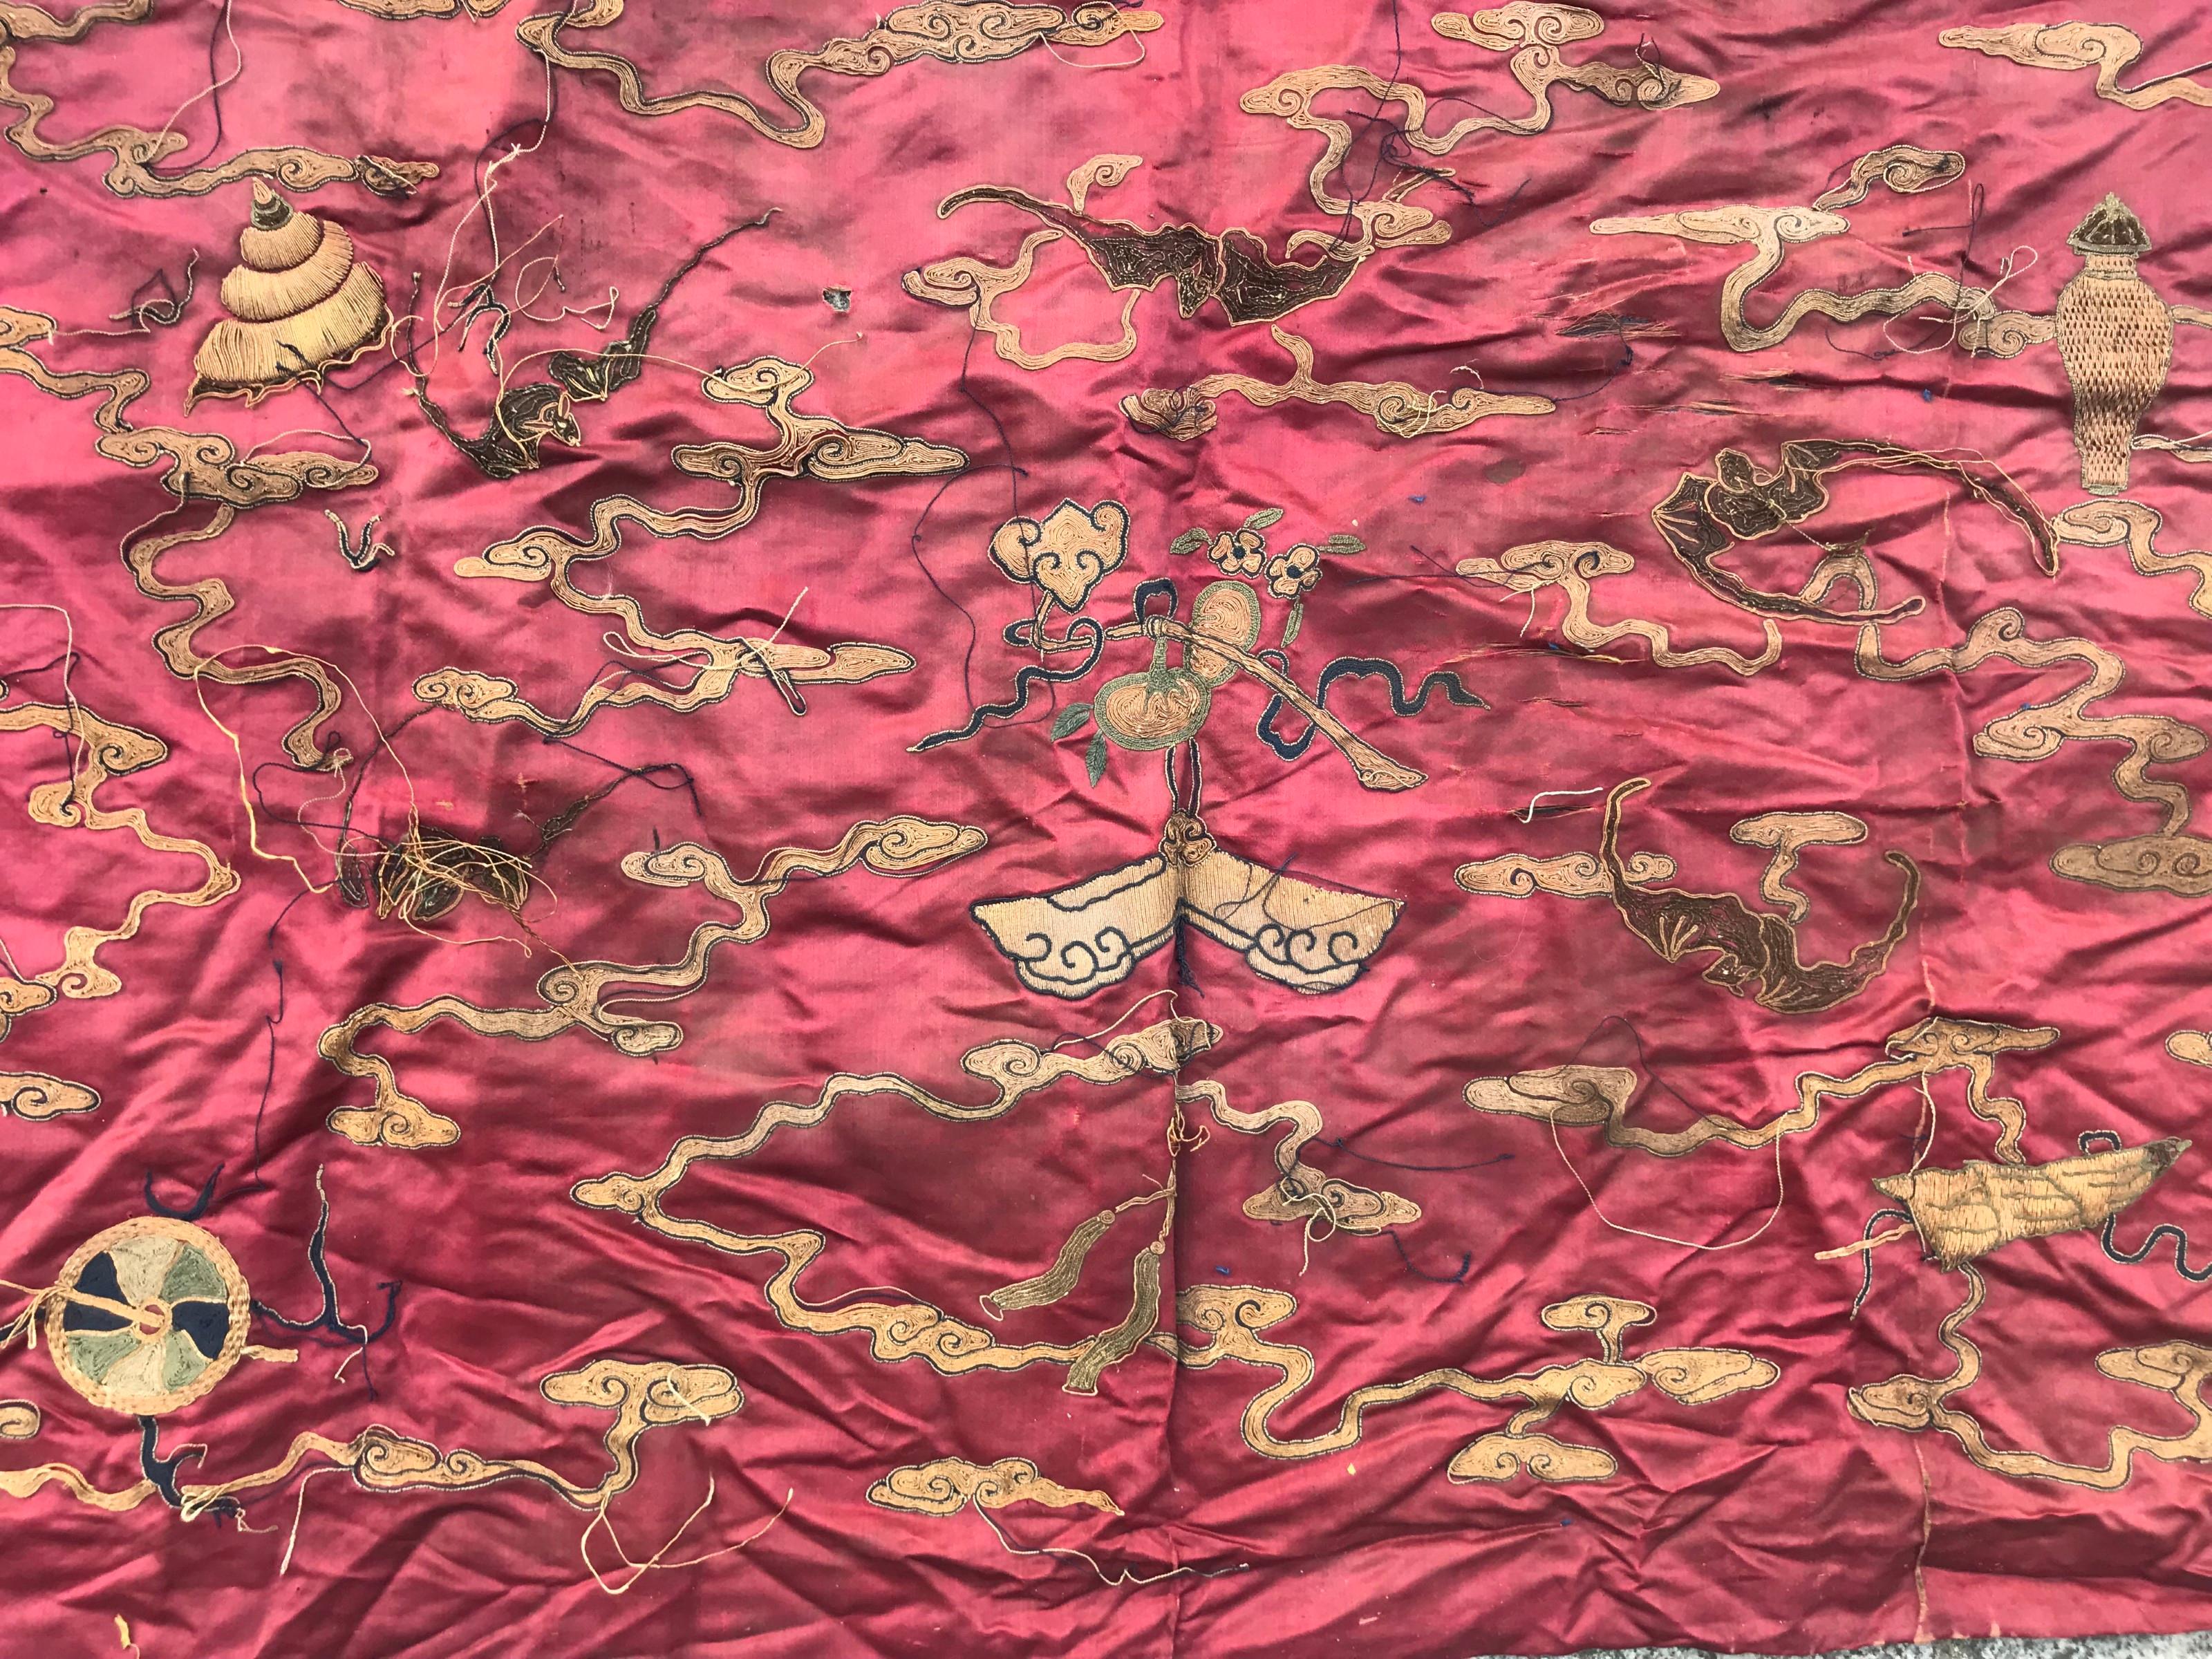 Late 19th century Chinese embroidery with silk and metal on silk foundation, entirely hand embroidered, some damages on metal wires.